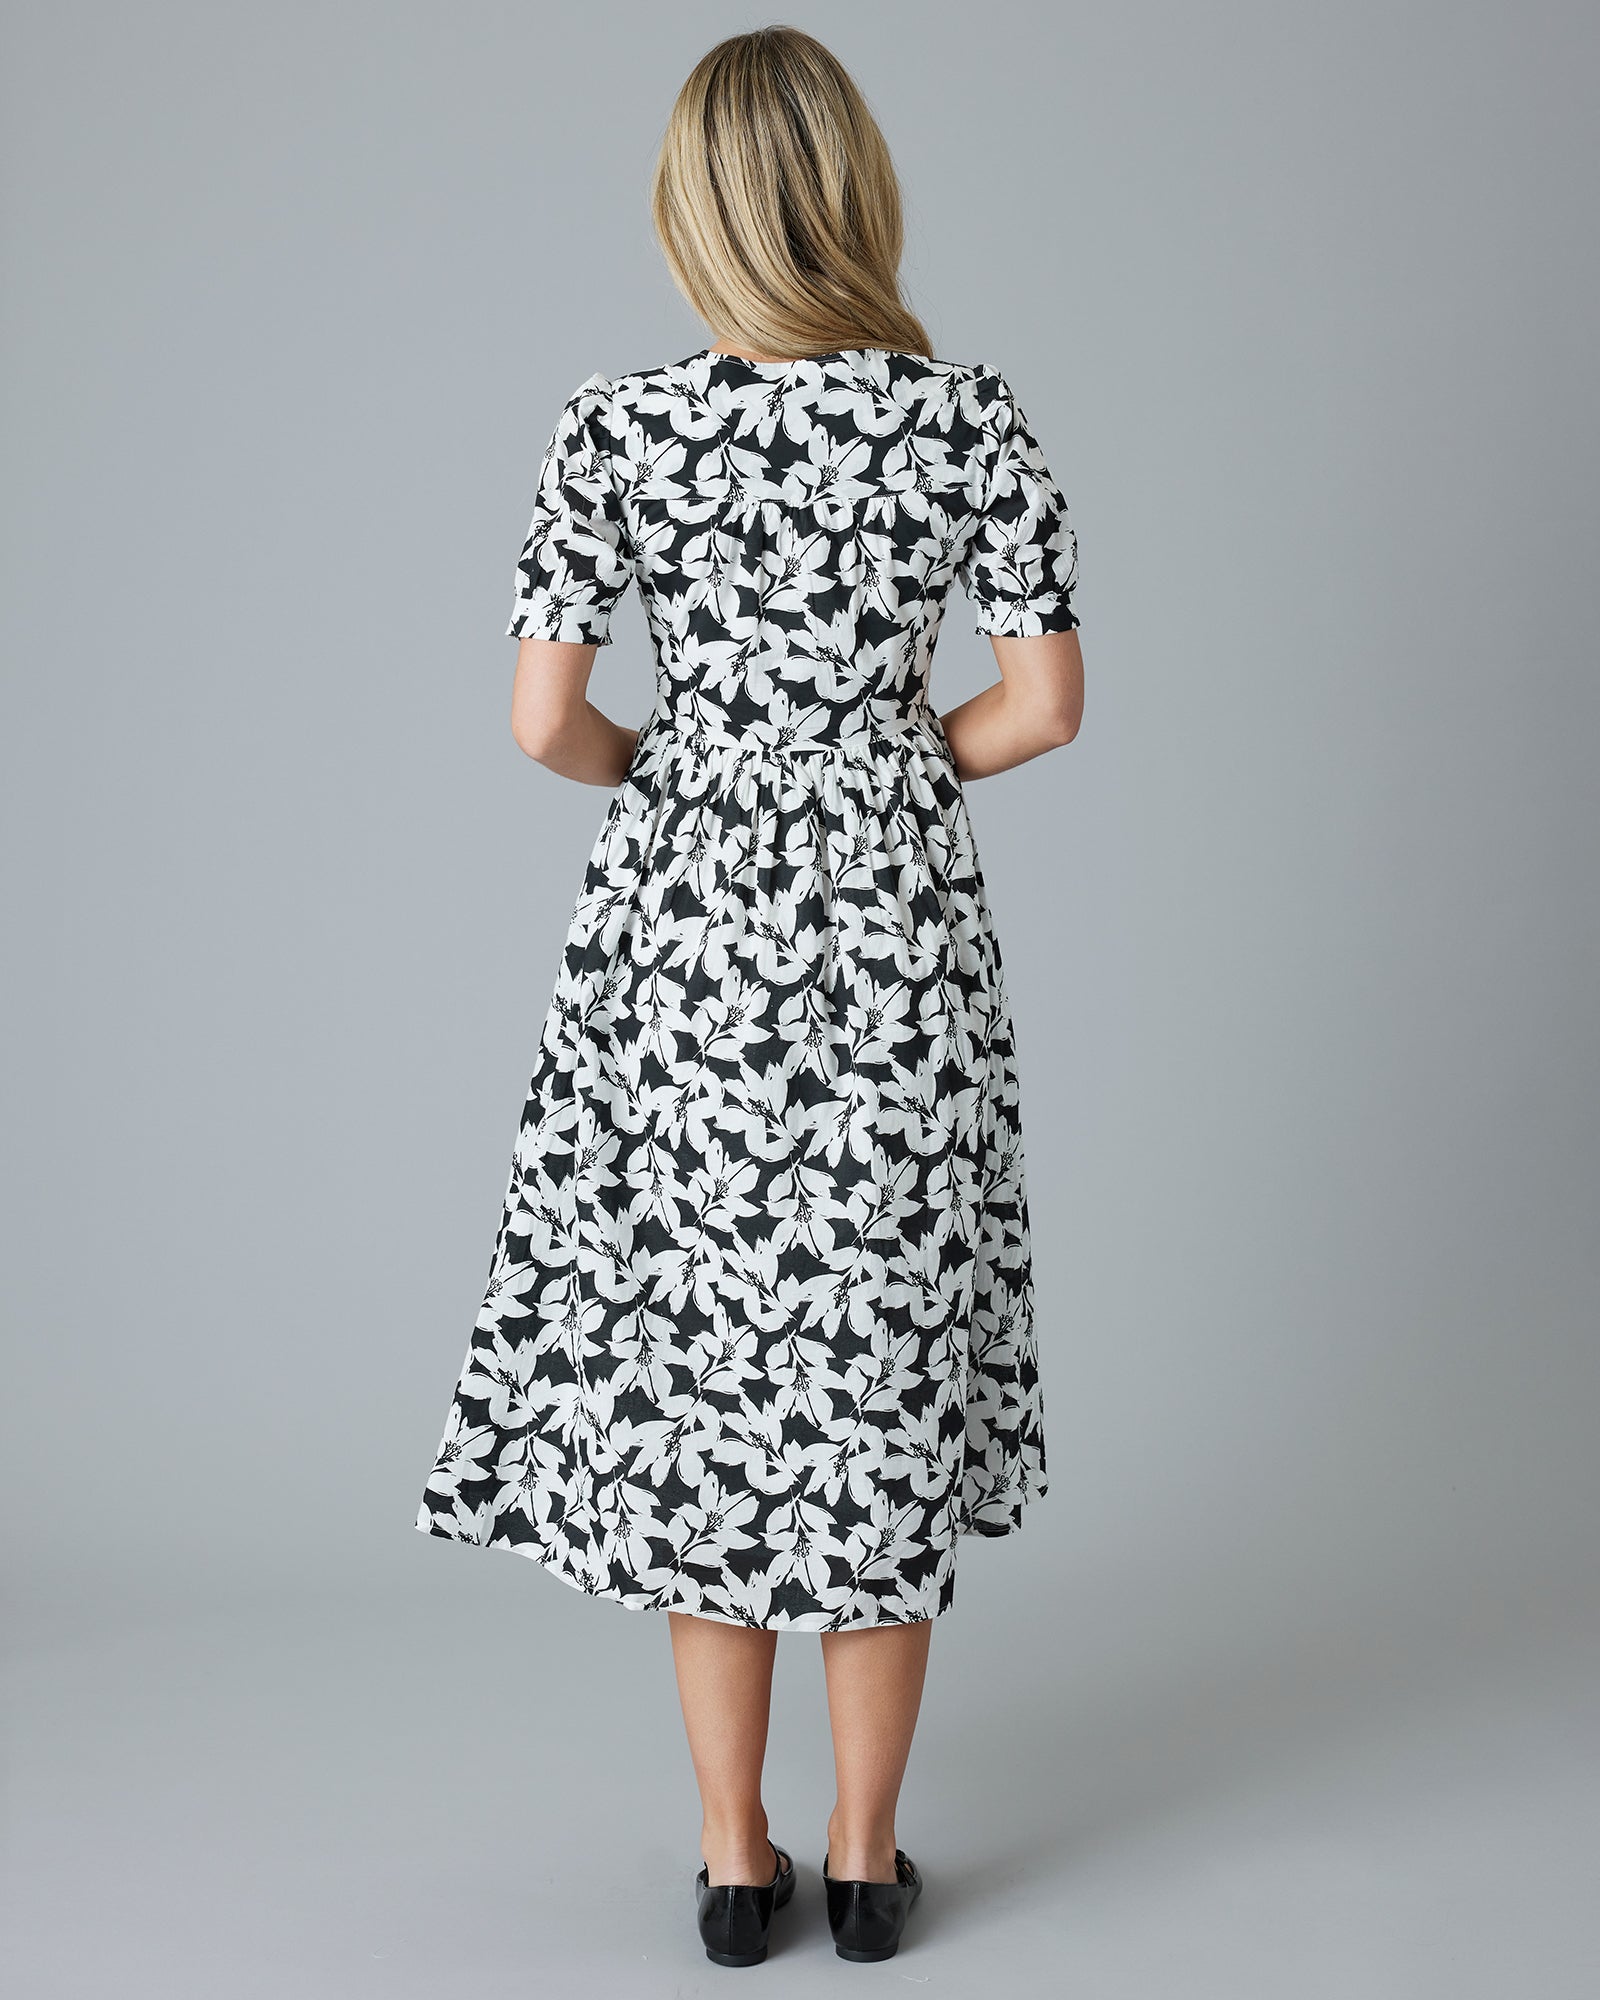 Woman in a black and white floral short sleeve midi-length dress